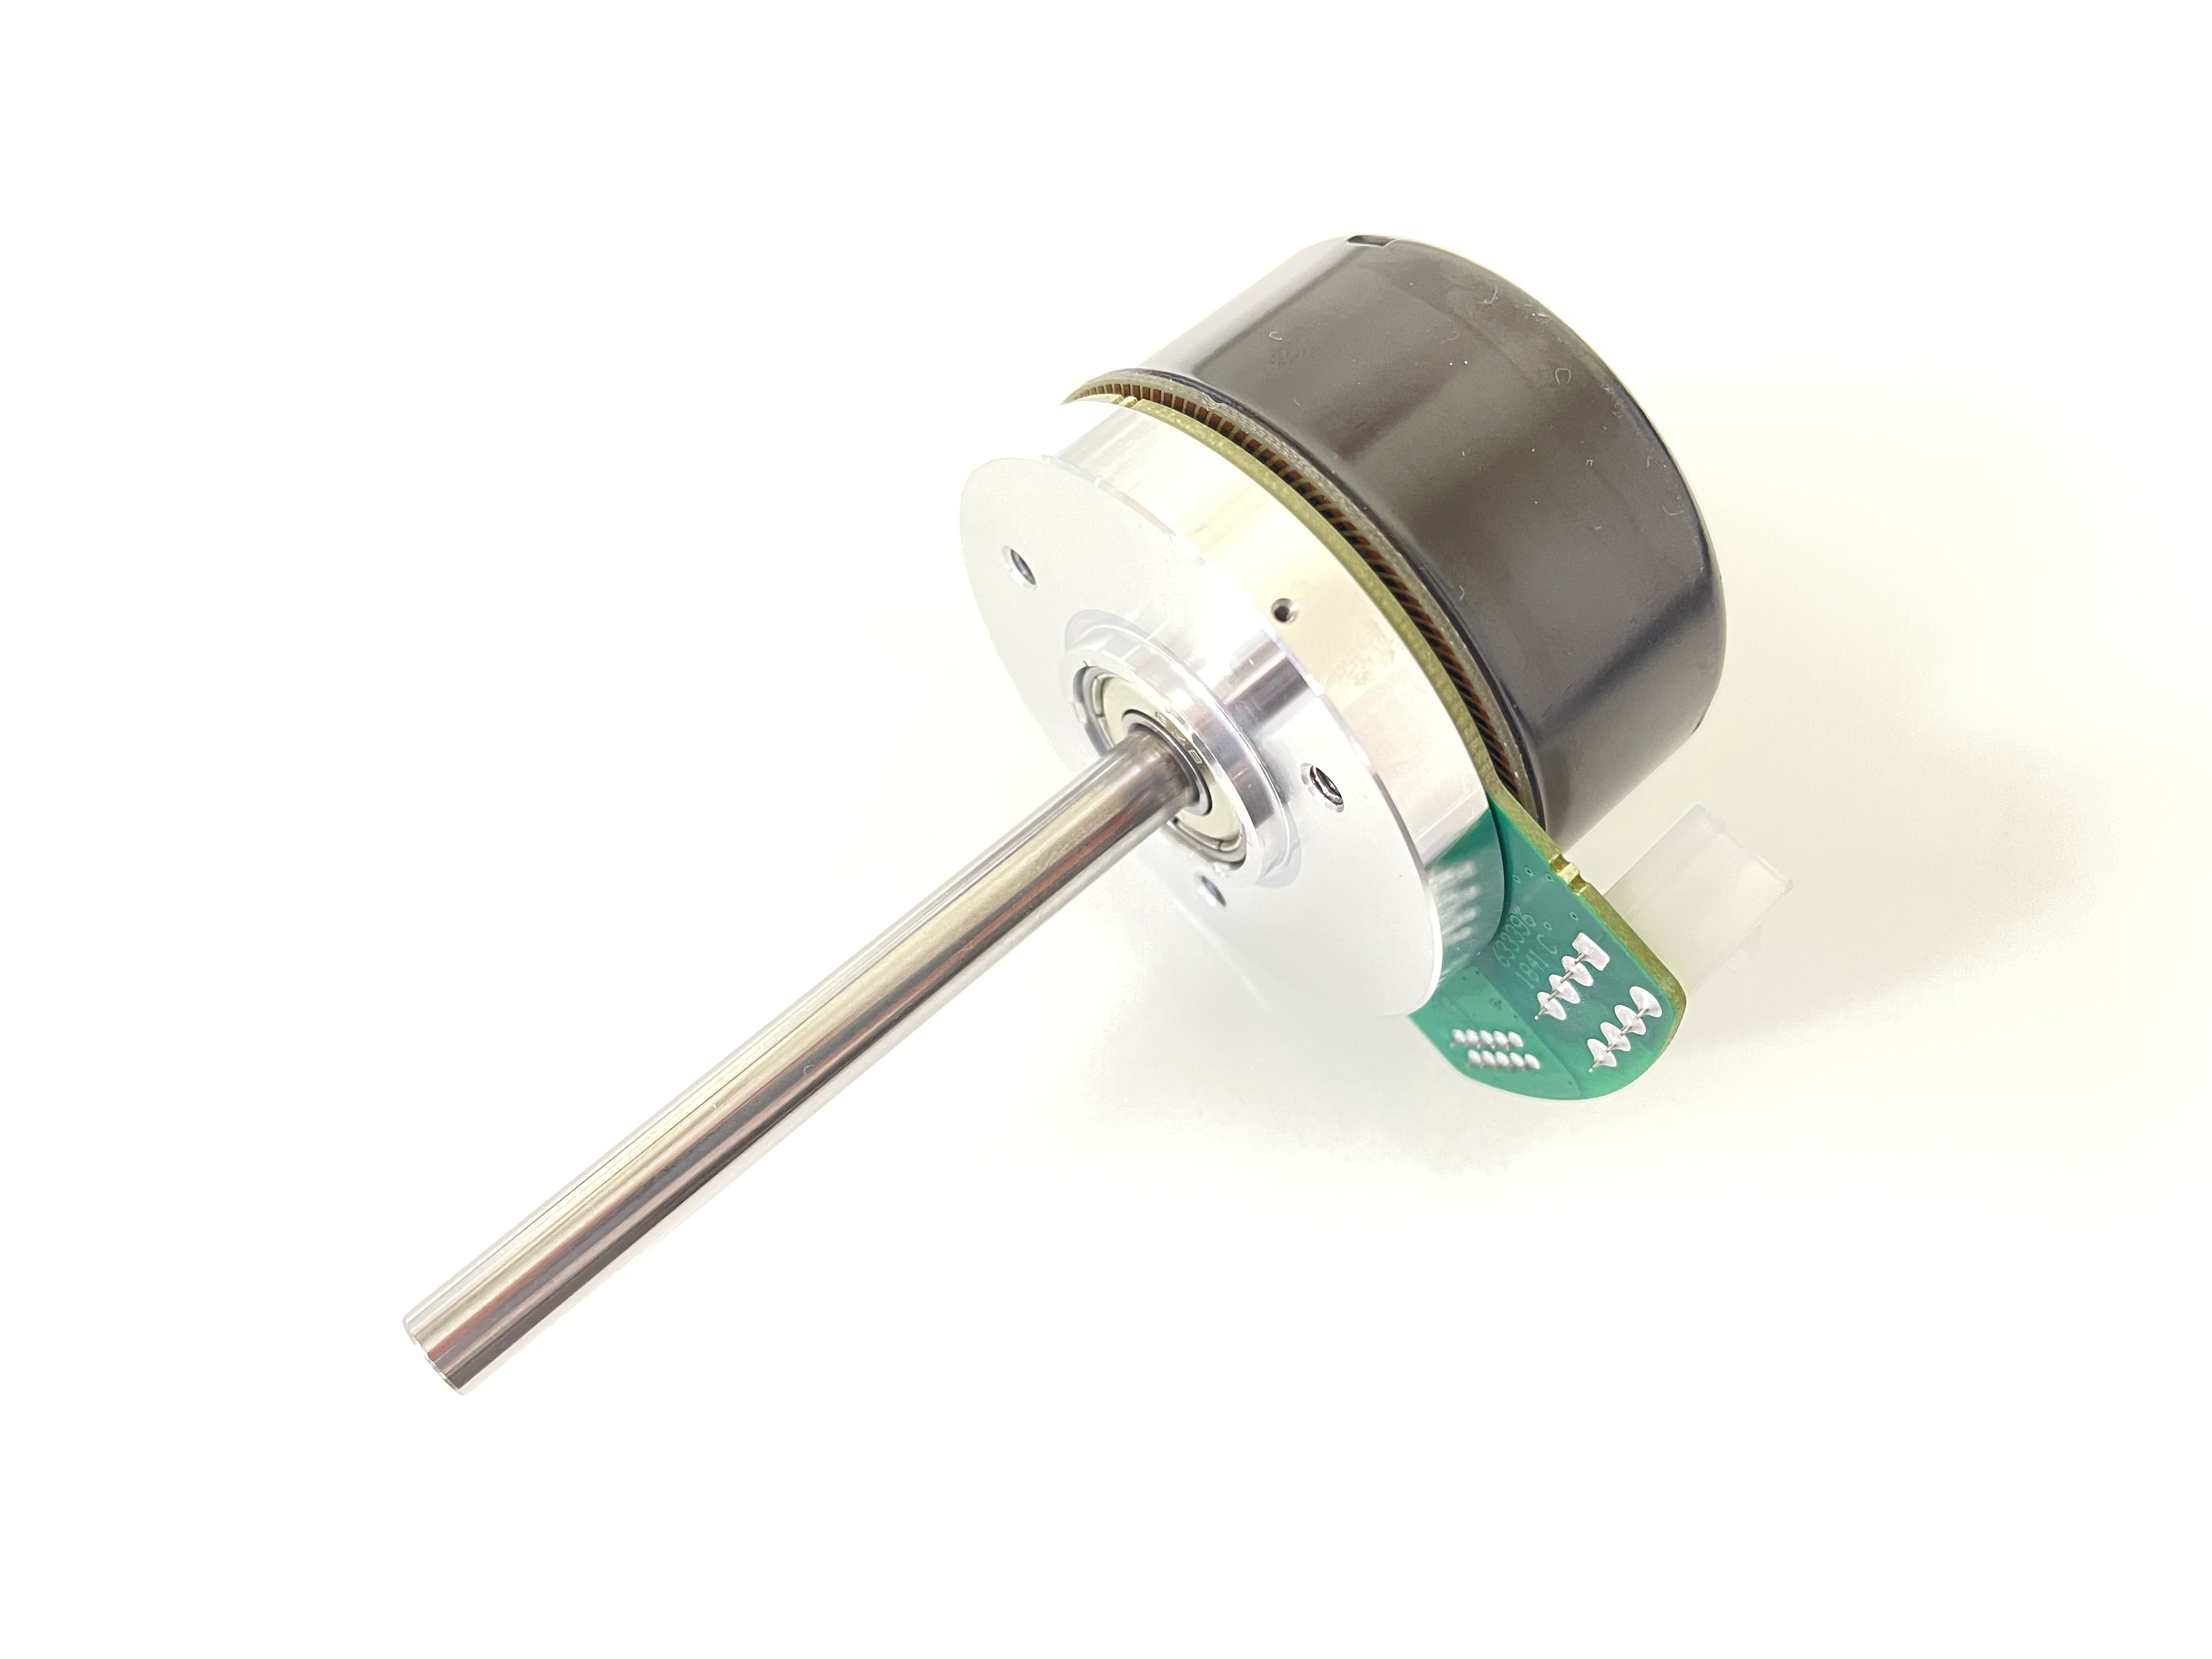 The new range of vented rotor brushless DC motors from maxon offer a number of customisable features